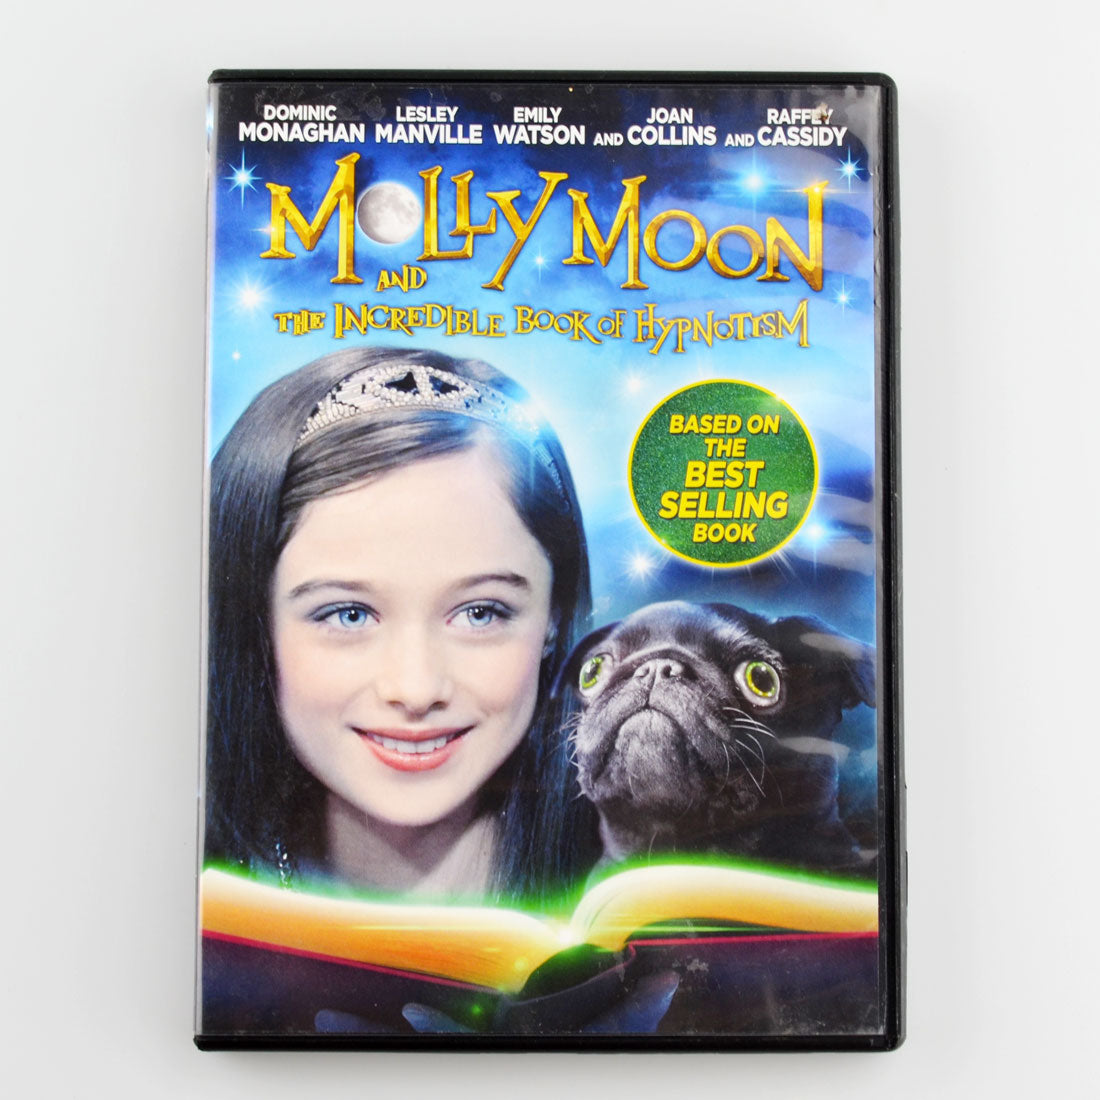 Molly Moon and The Incredible Book of Hypnotism (DVD, 2013) Dominic Monaghan